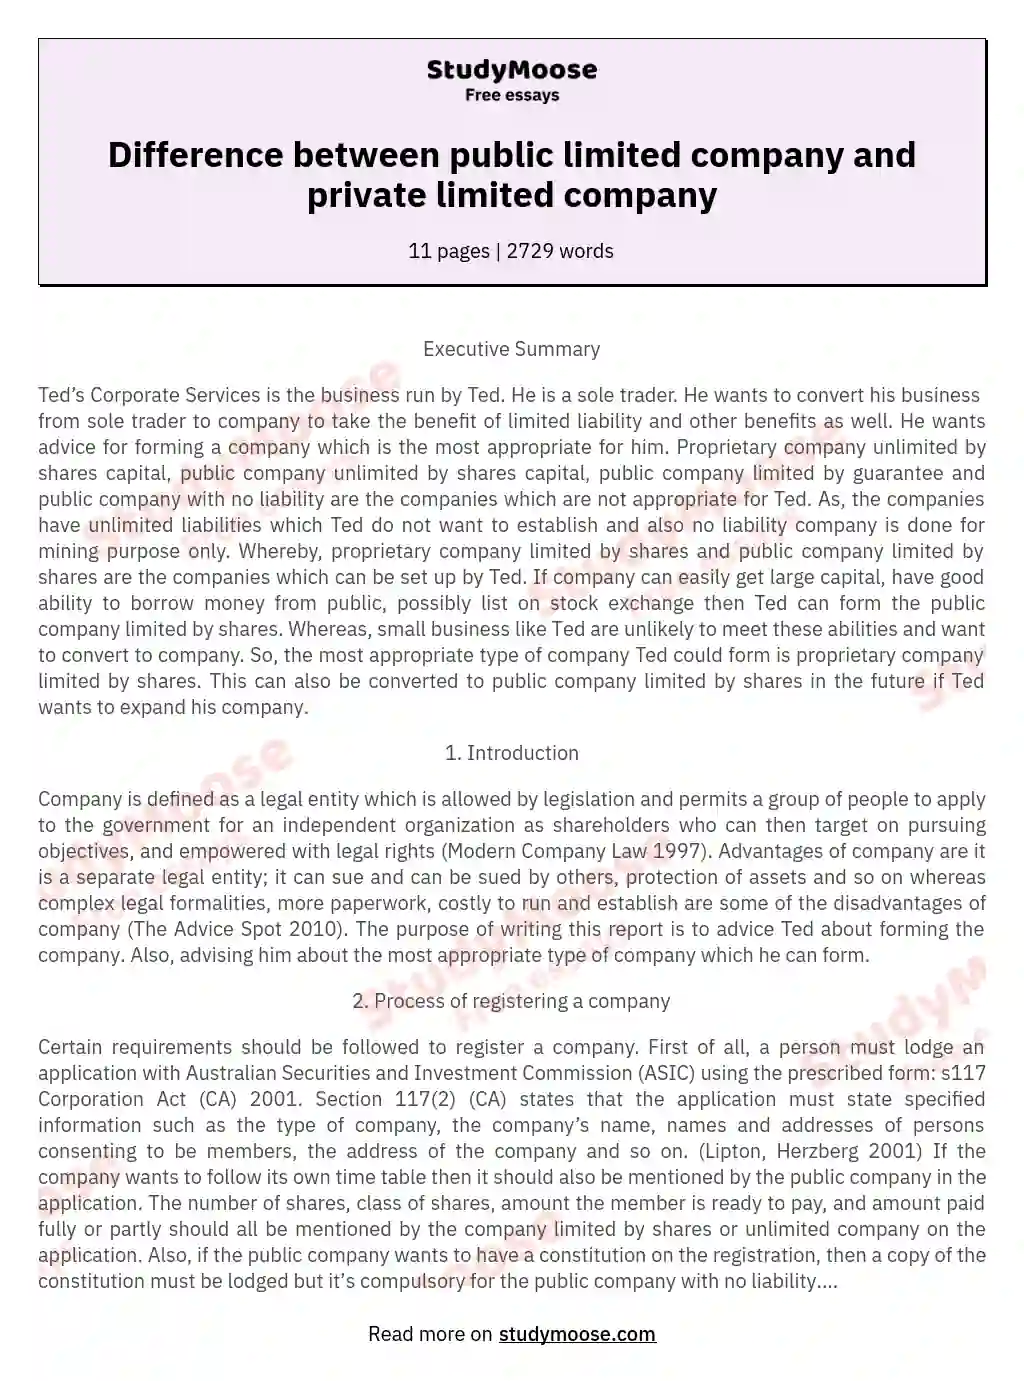 Difference between public limited company and private limited company